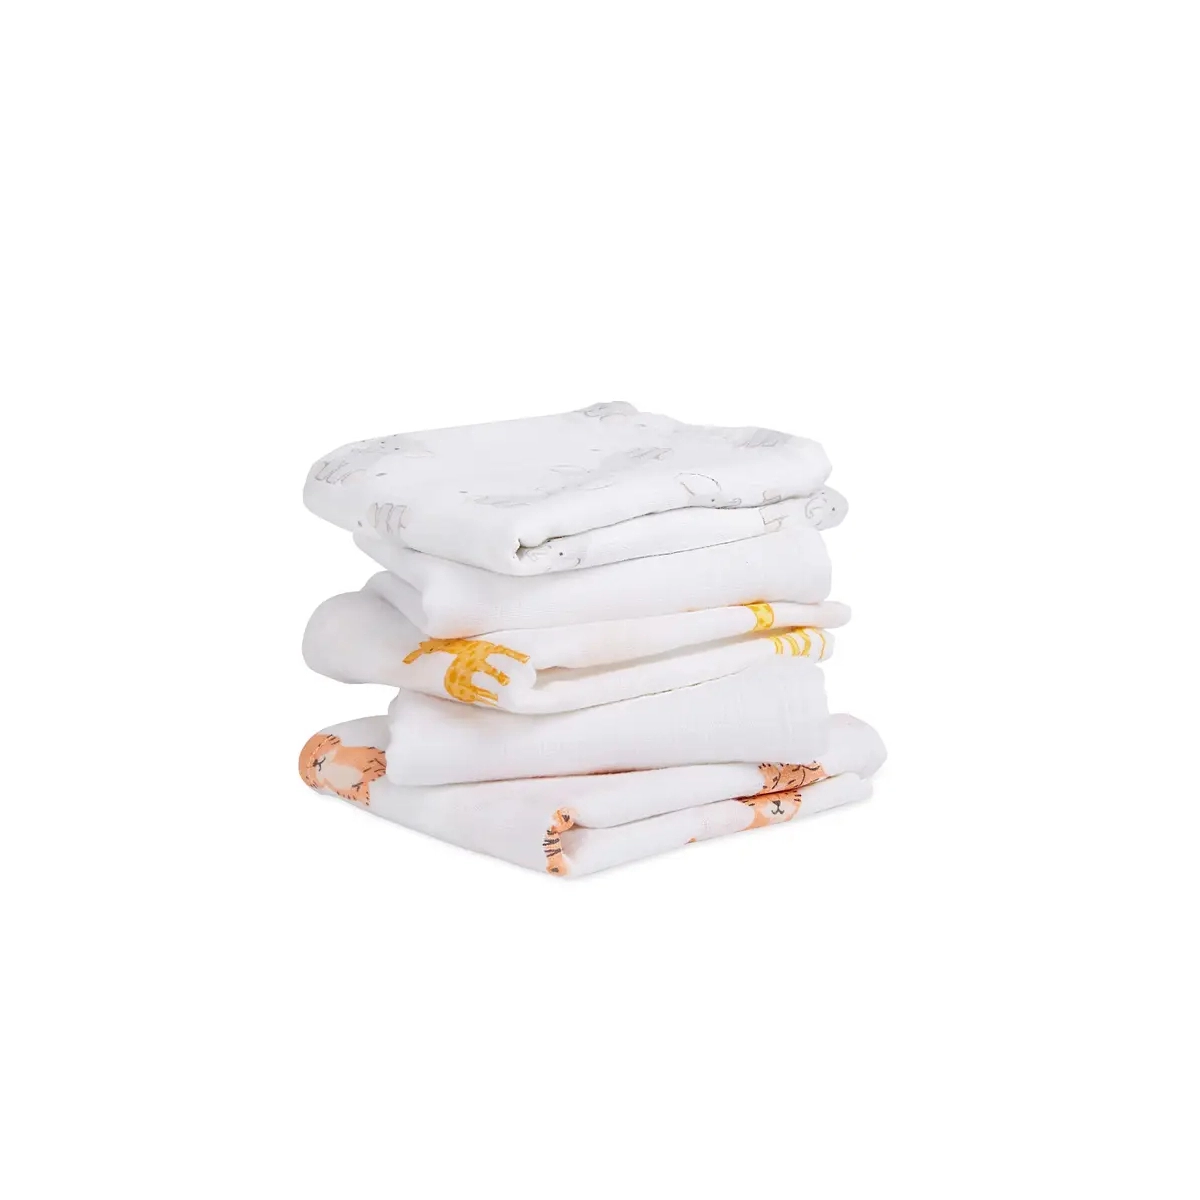 Image of Aden + Anais Pack of 5 Essentials Cotton Muslin Squares - Safari Babes (23-19-276)